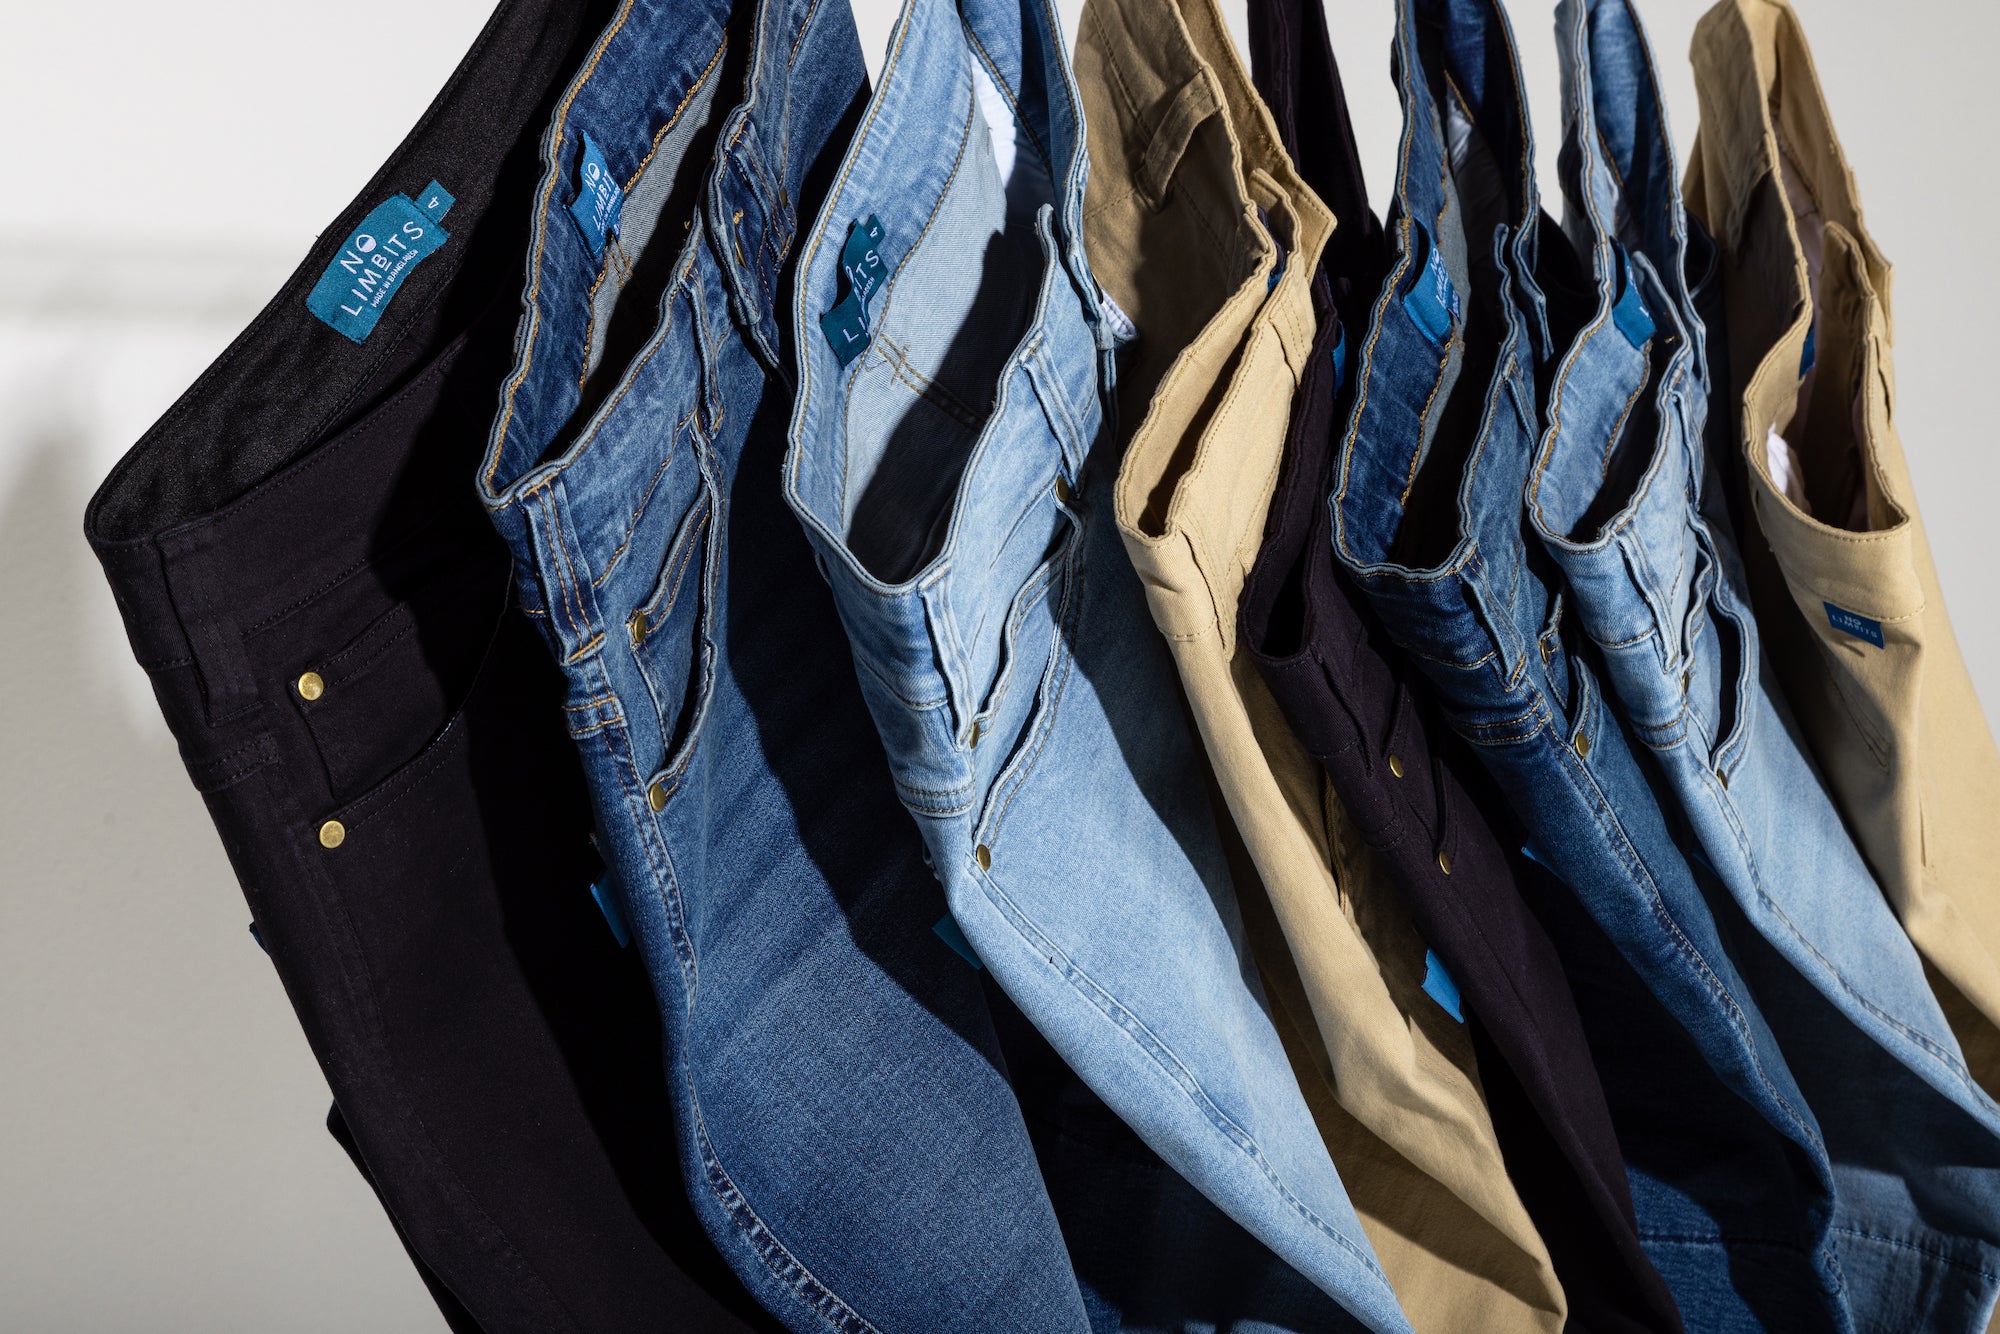 Jeans of multiple different colors are hung together overlapping one another. The colors are black, dark blue, light blue, and khaki. 